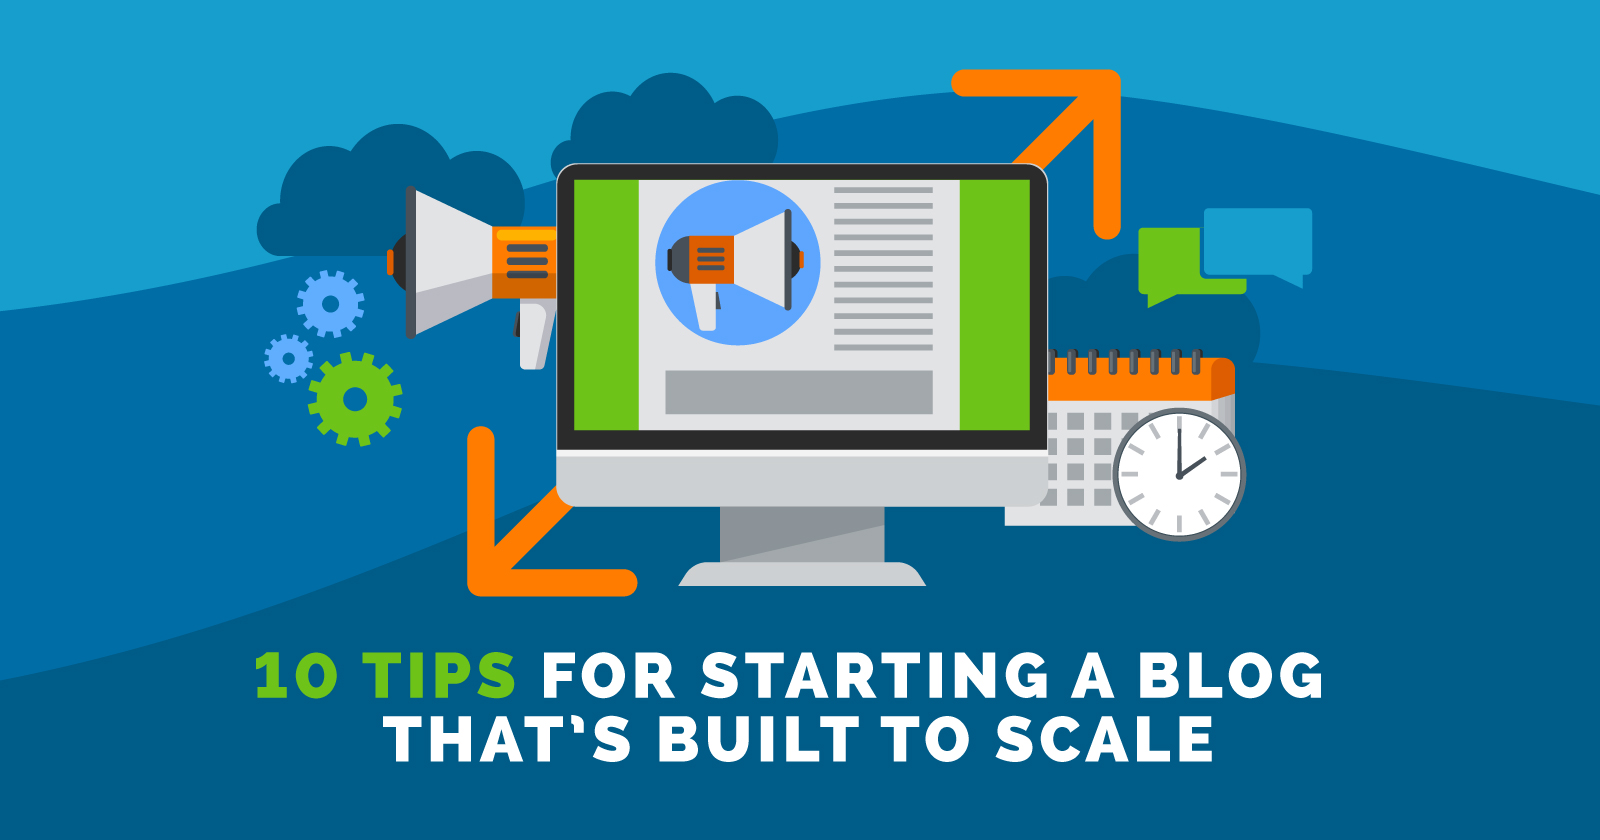 Blog content ideation: 17 Tips to generate blog ideas » Social